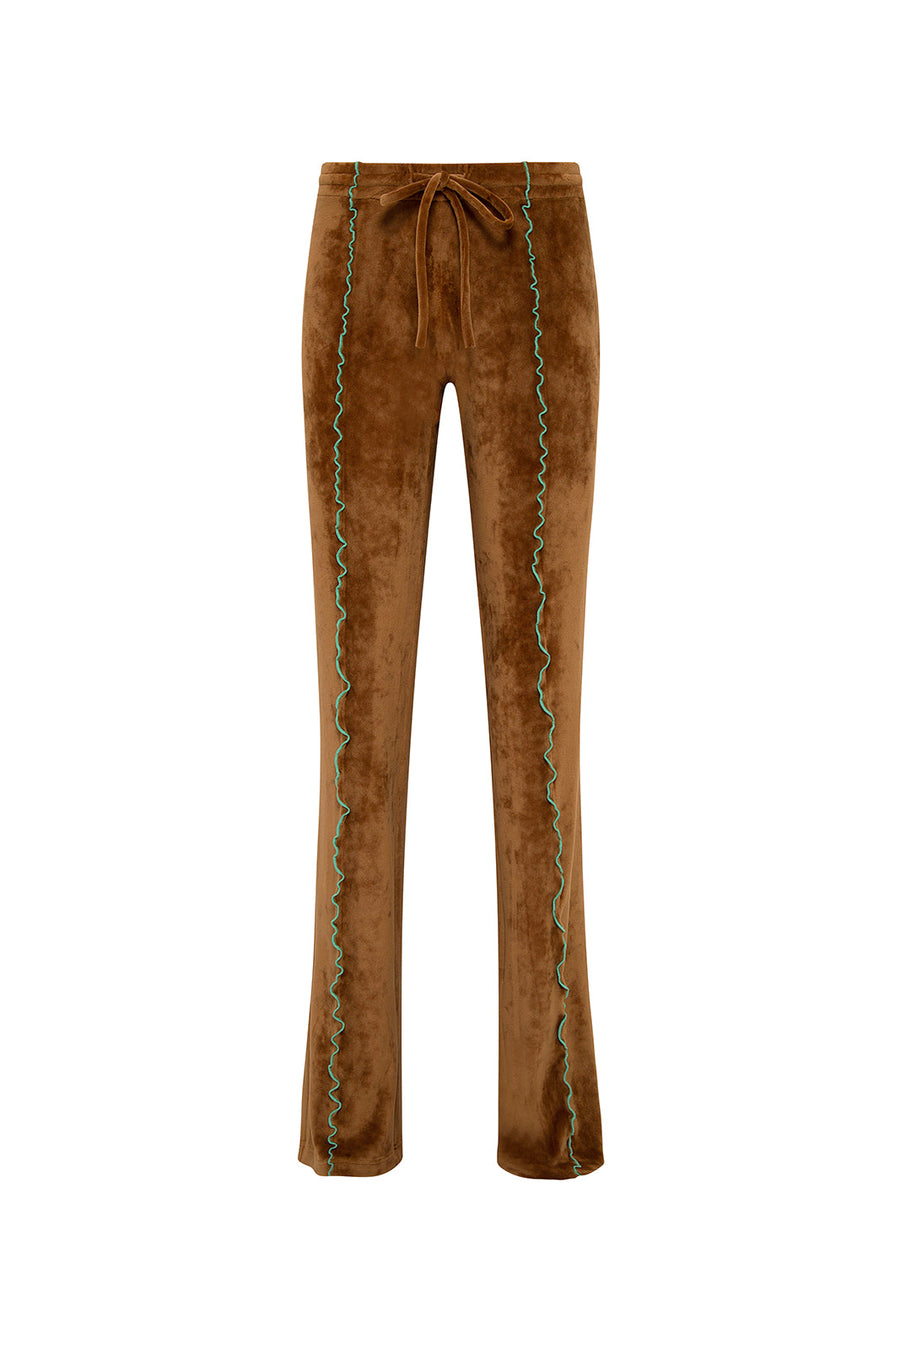 SELY - Contrast stitch detailed velvet pants